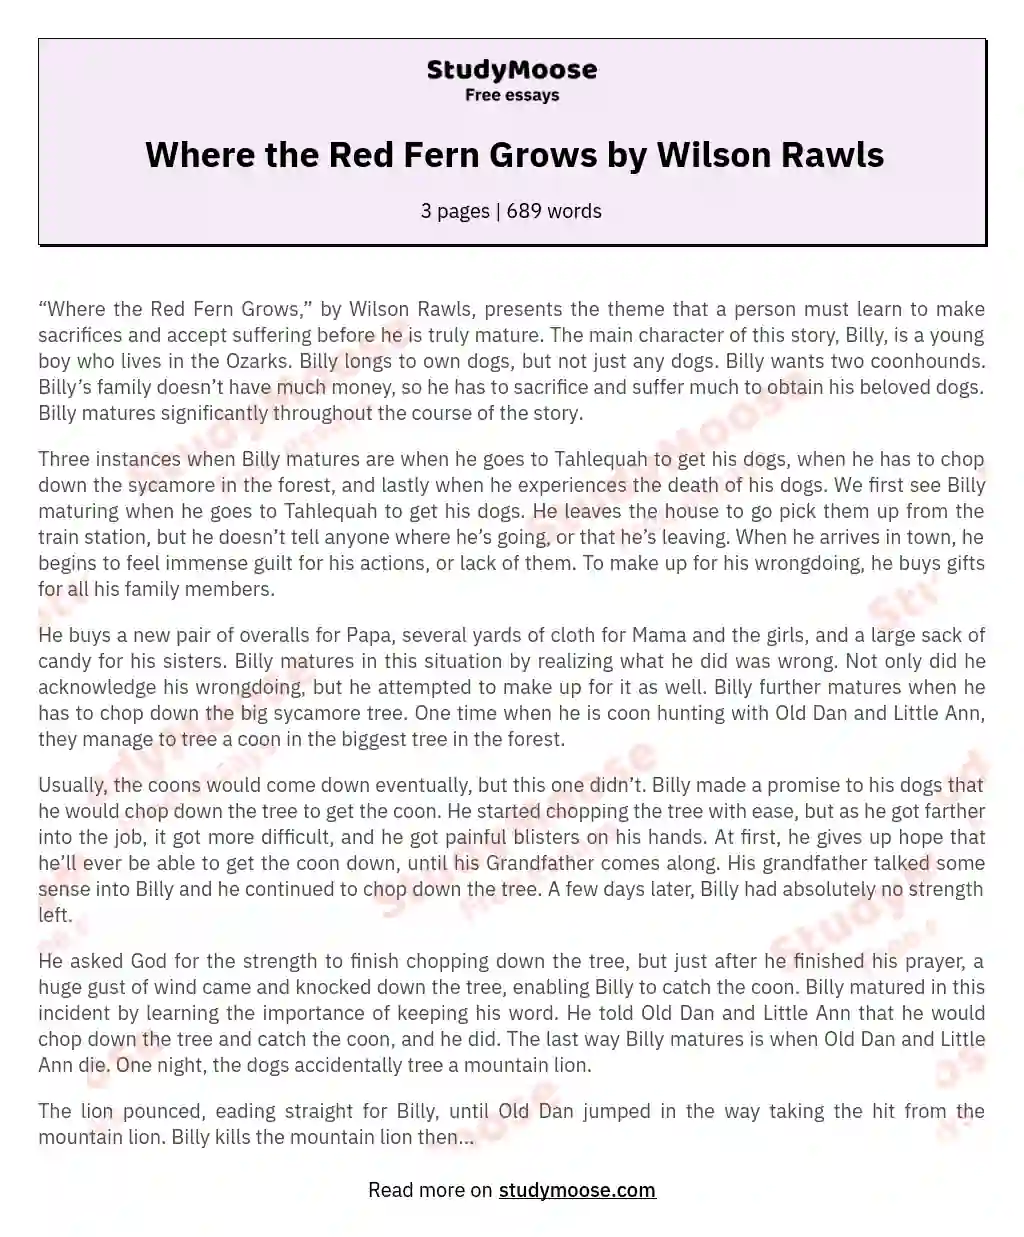 Where the Red Fern Grows by Wilson Rawls essay